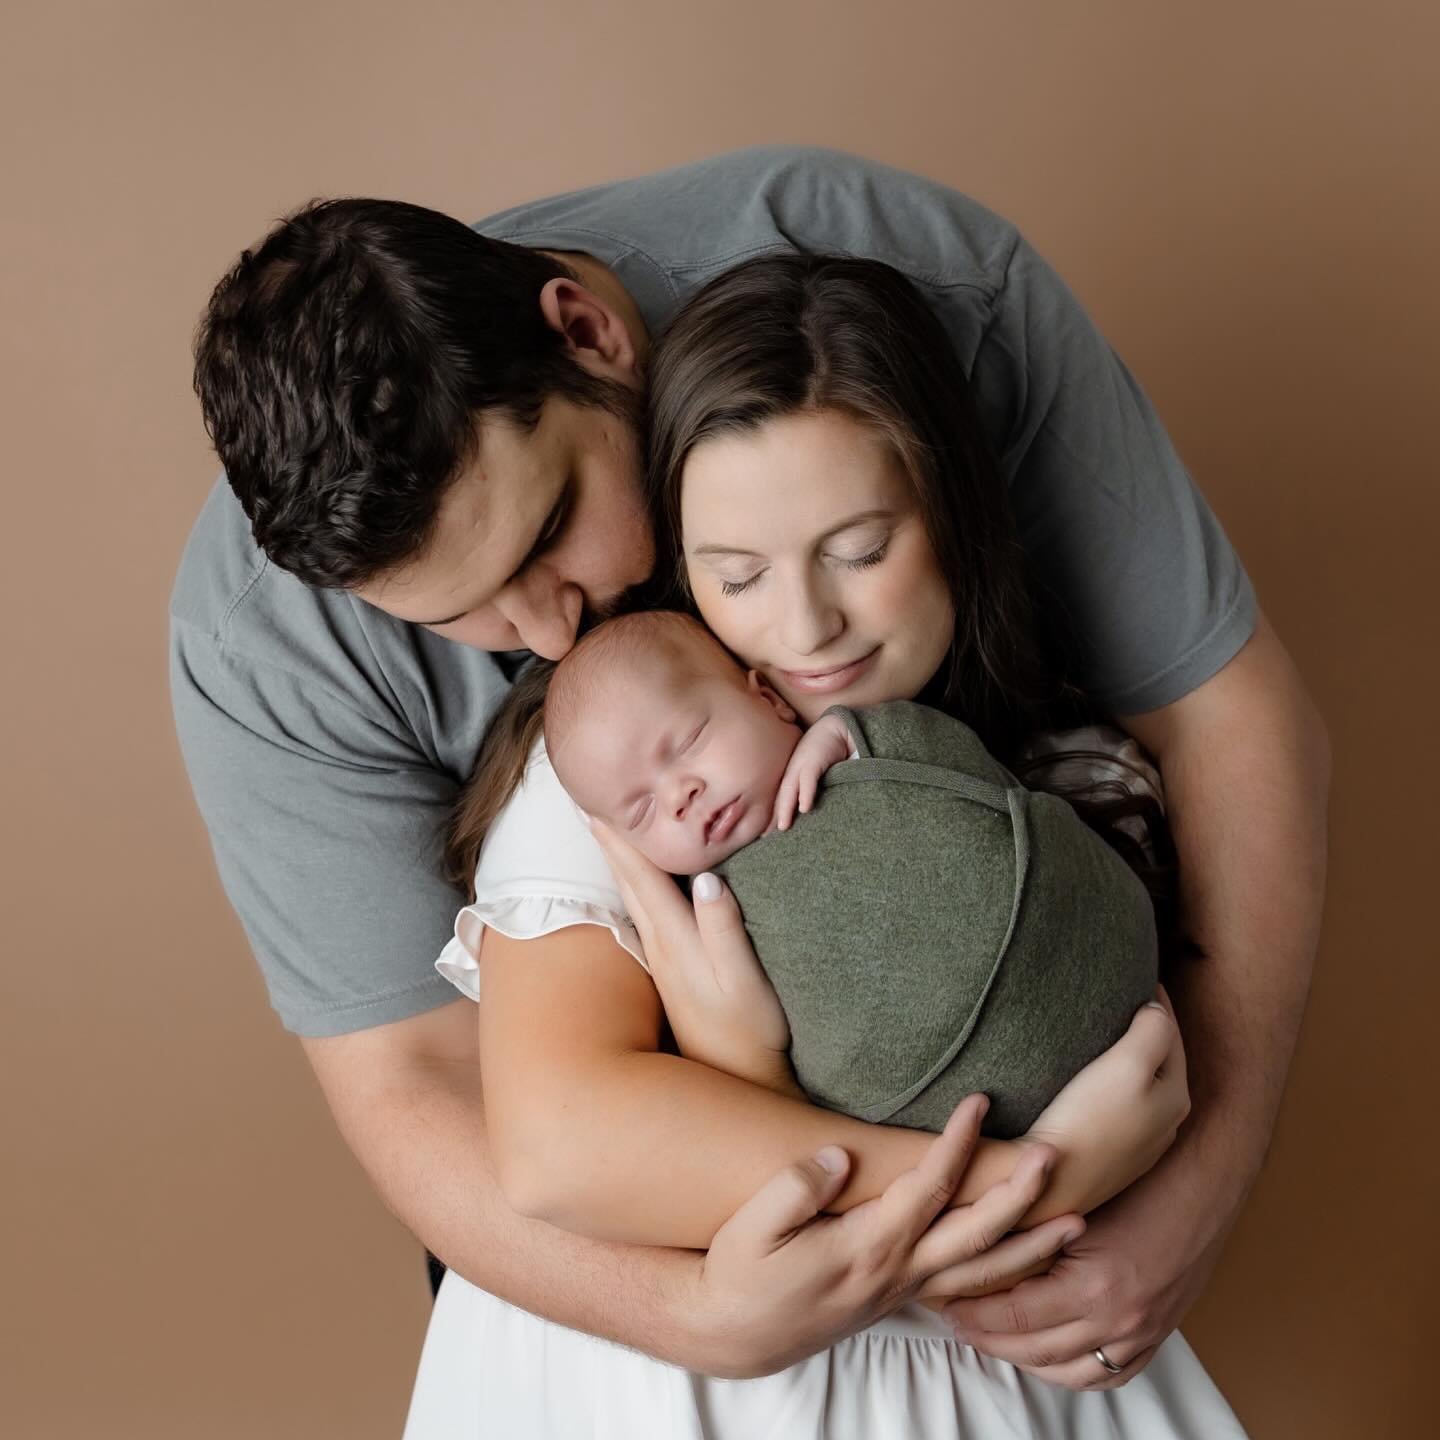 Happy Sunday!! I love this new background color for studio newborn photos! I now have 3 colors to choose from when booking a newborn in my in-home studio (and of course all the wraps!).
I offer newborn sessions in your home or mine! All sessions incl